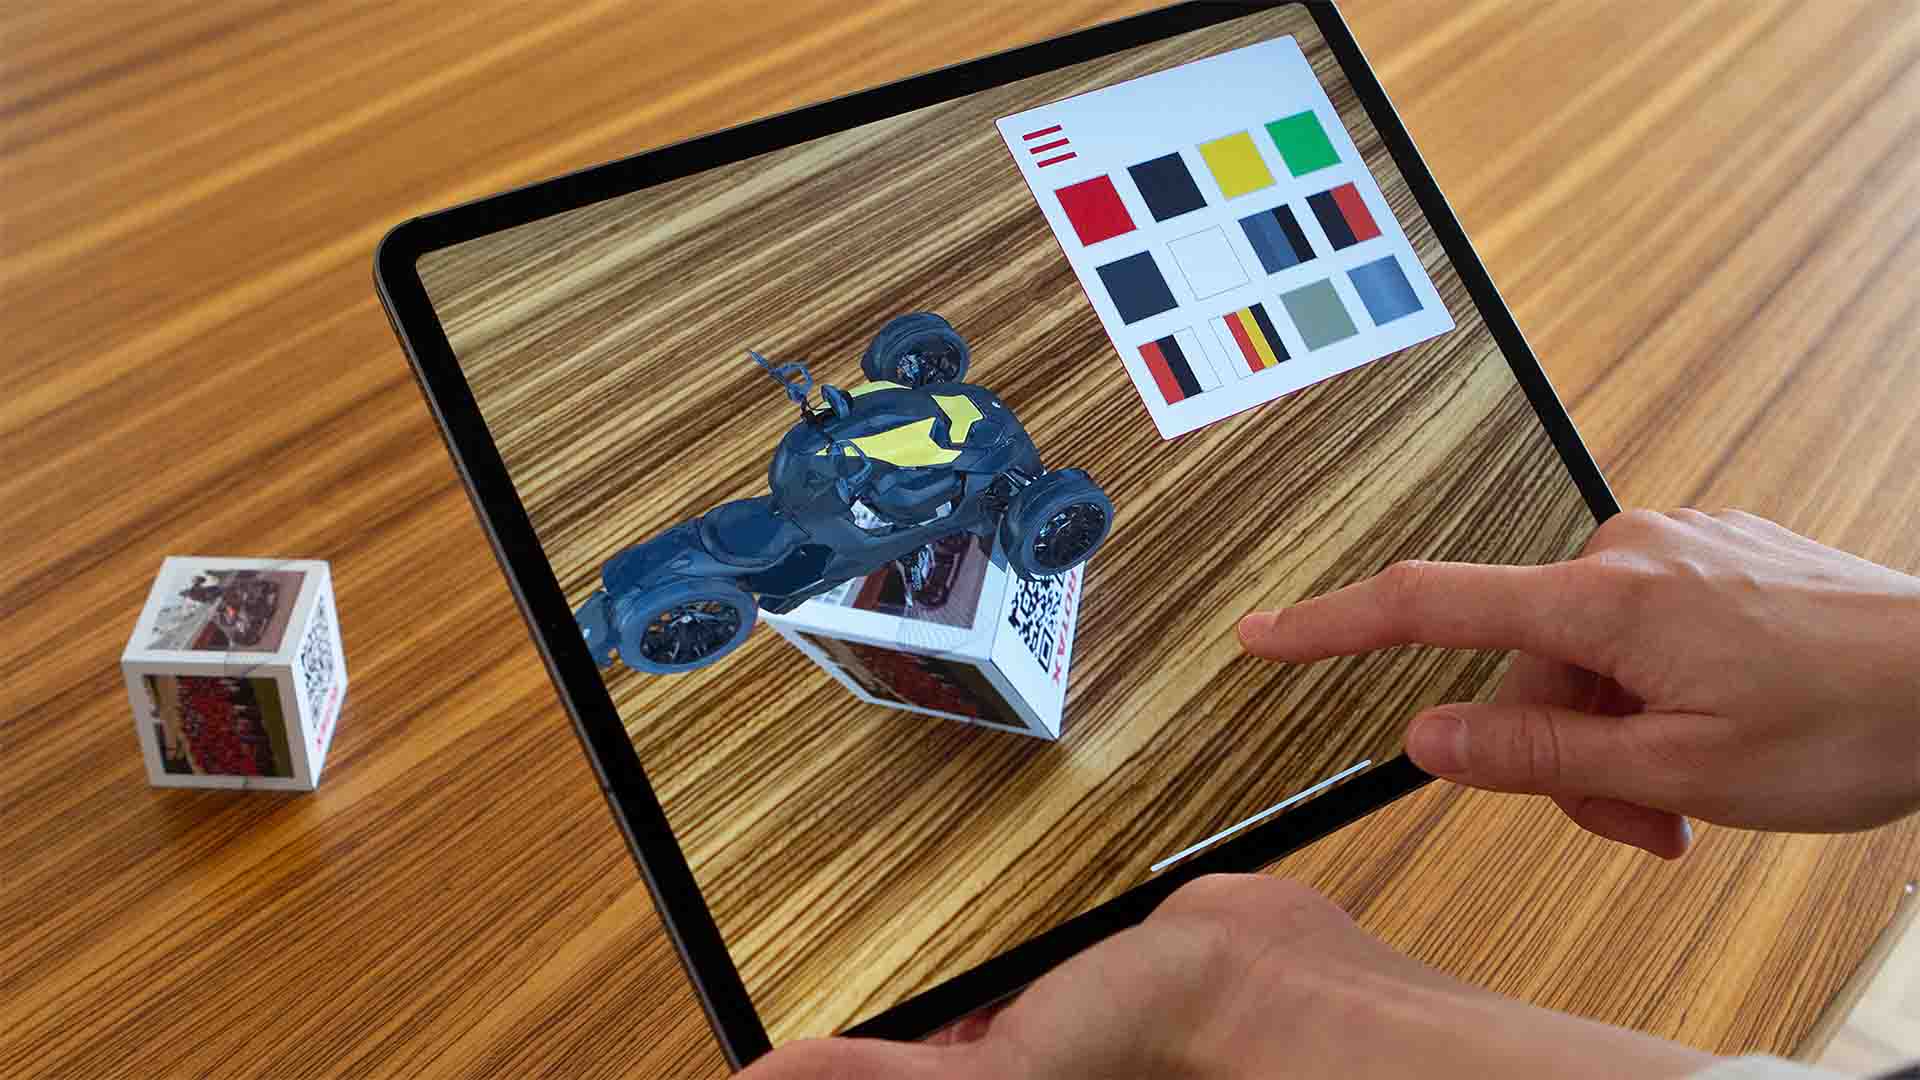 The „Rotax 100+“ Augmented Reality app brings a 6-sided real cube to life by showing digital, interactive content for each side.